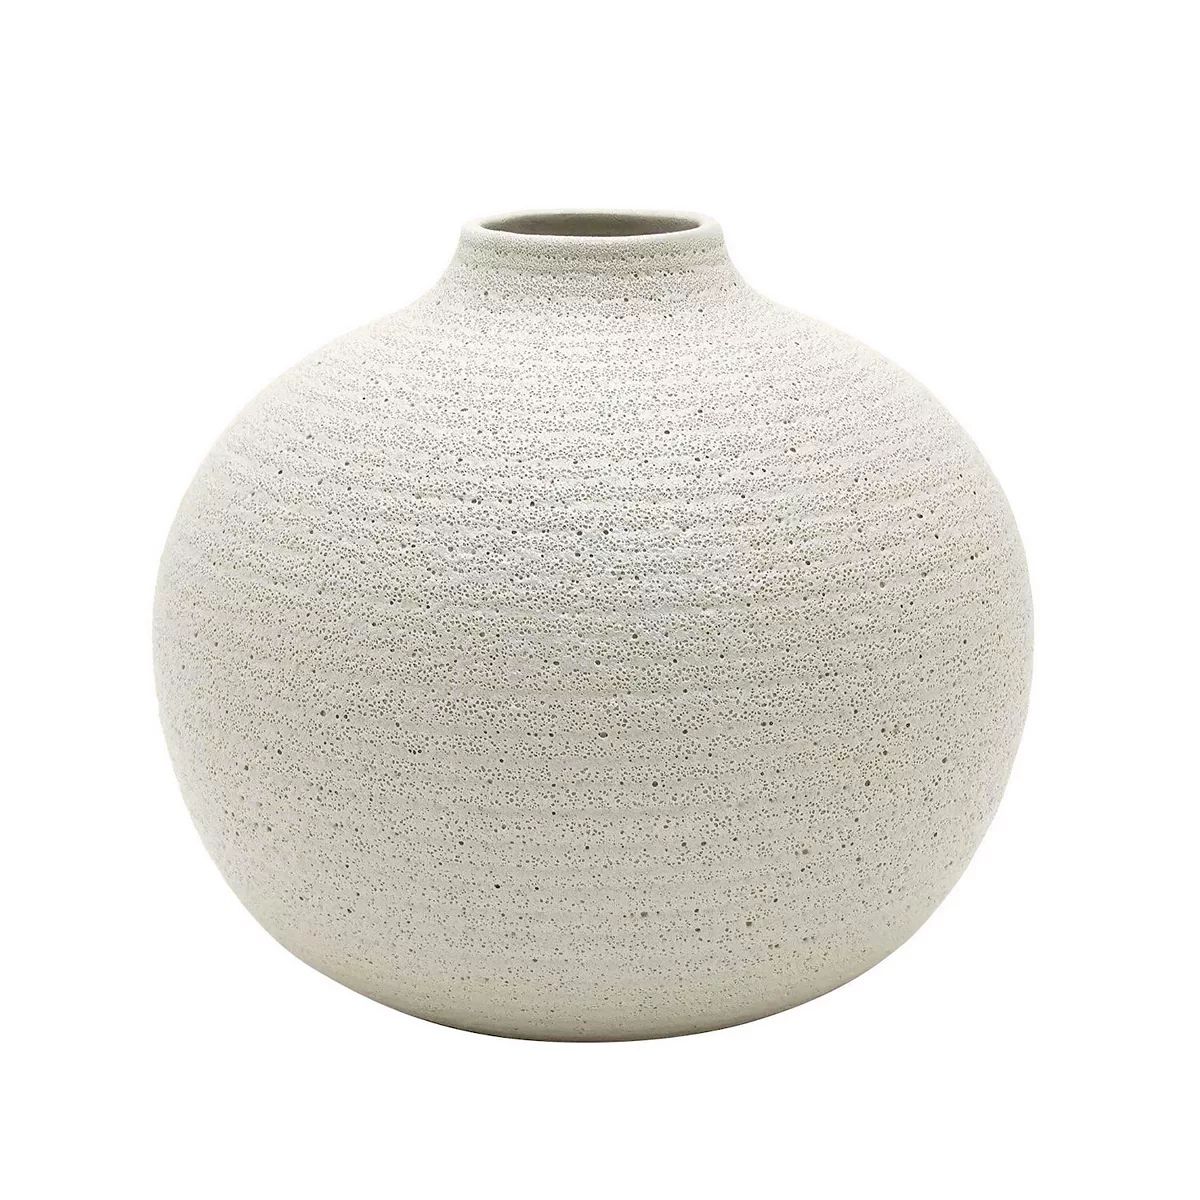 Sonoma Goods For Life® Small Round Ribbed Vase Table Decor | Kohl's